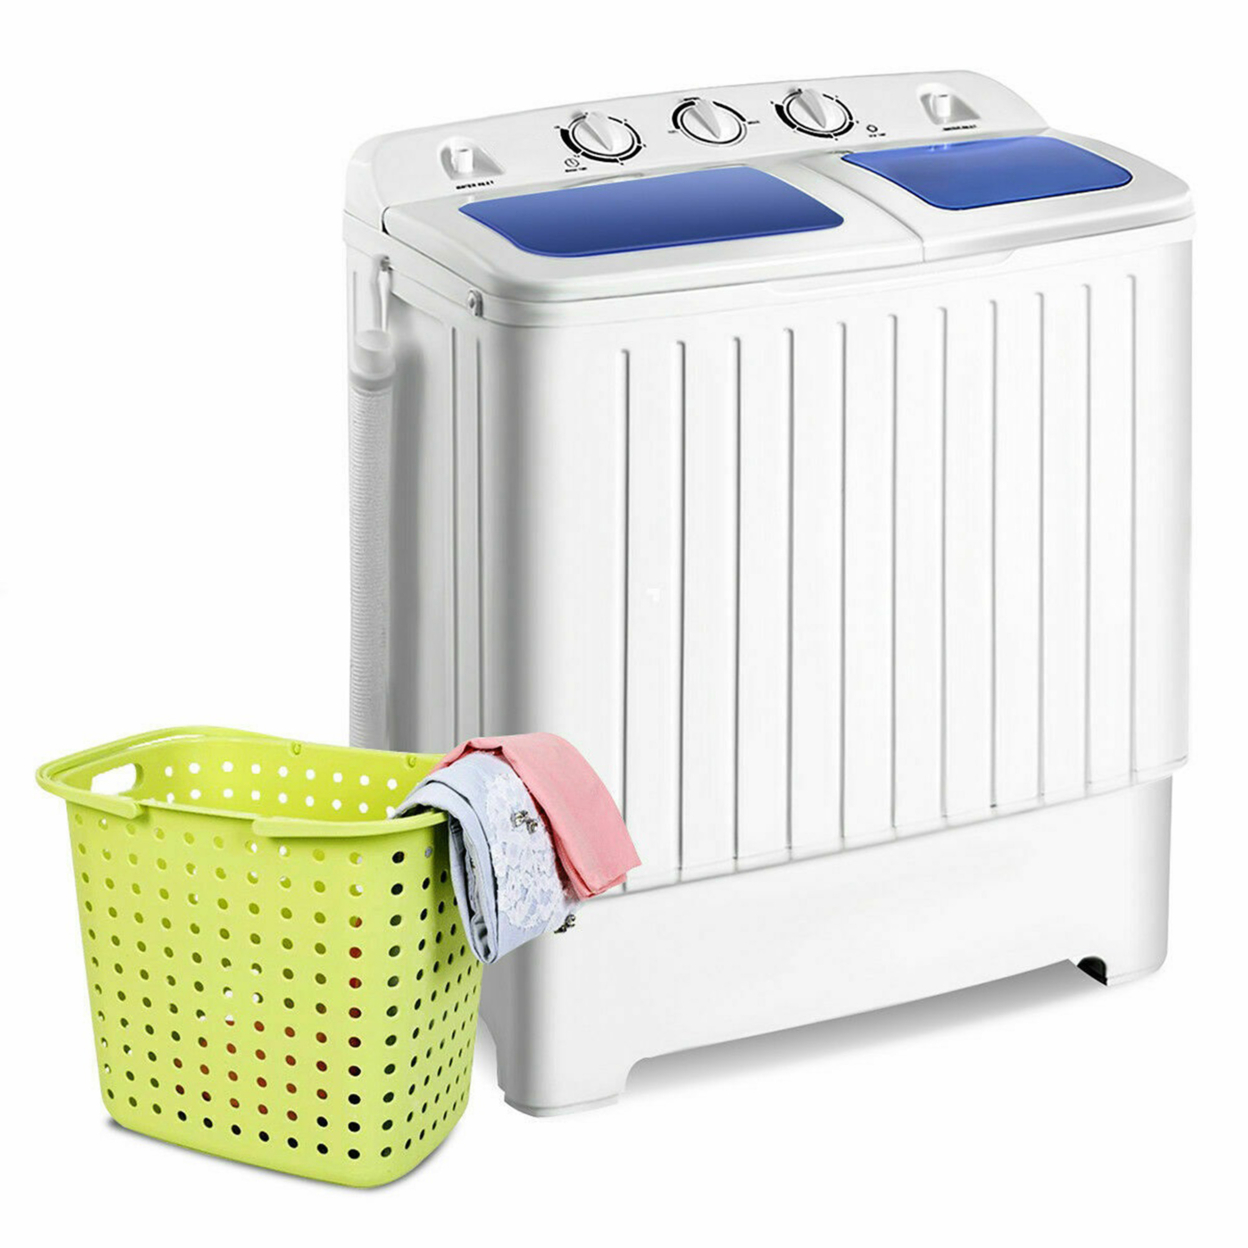 Compact Portable Washing Machine Twin Tub 20 Lbs Washer Spinner Home Dorm